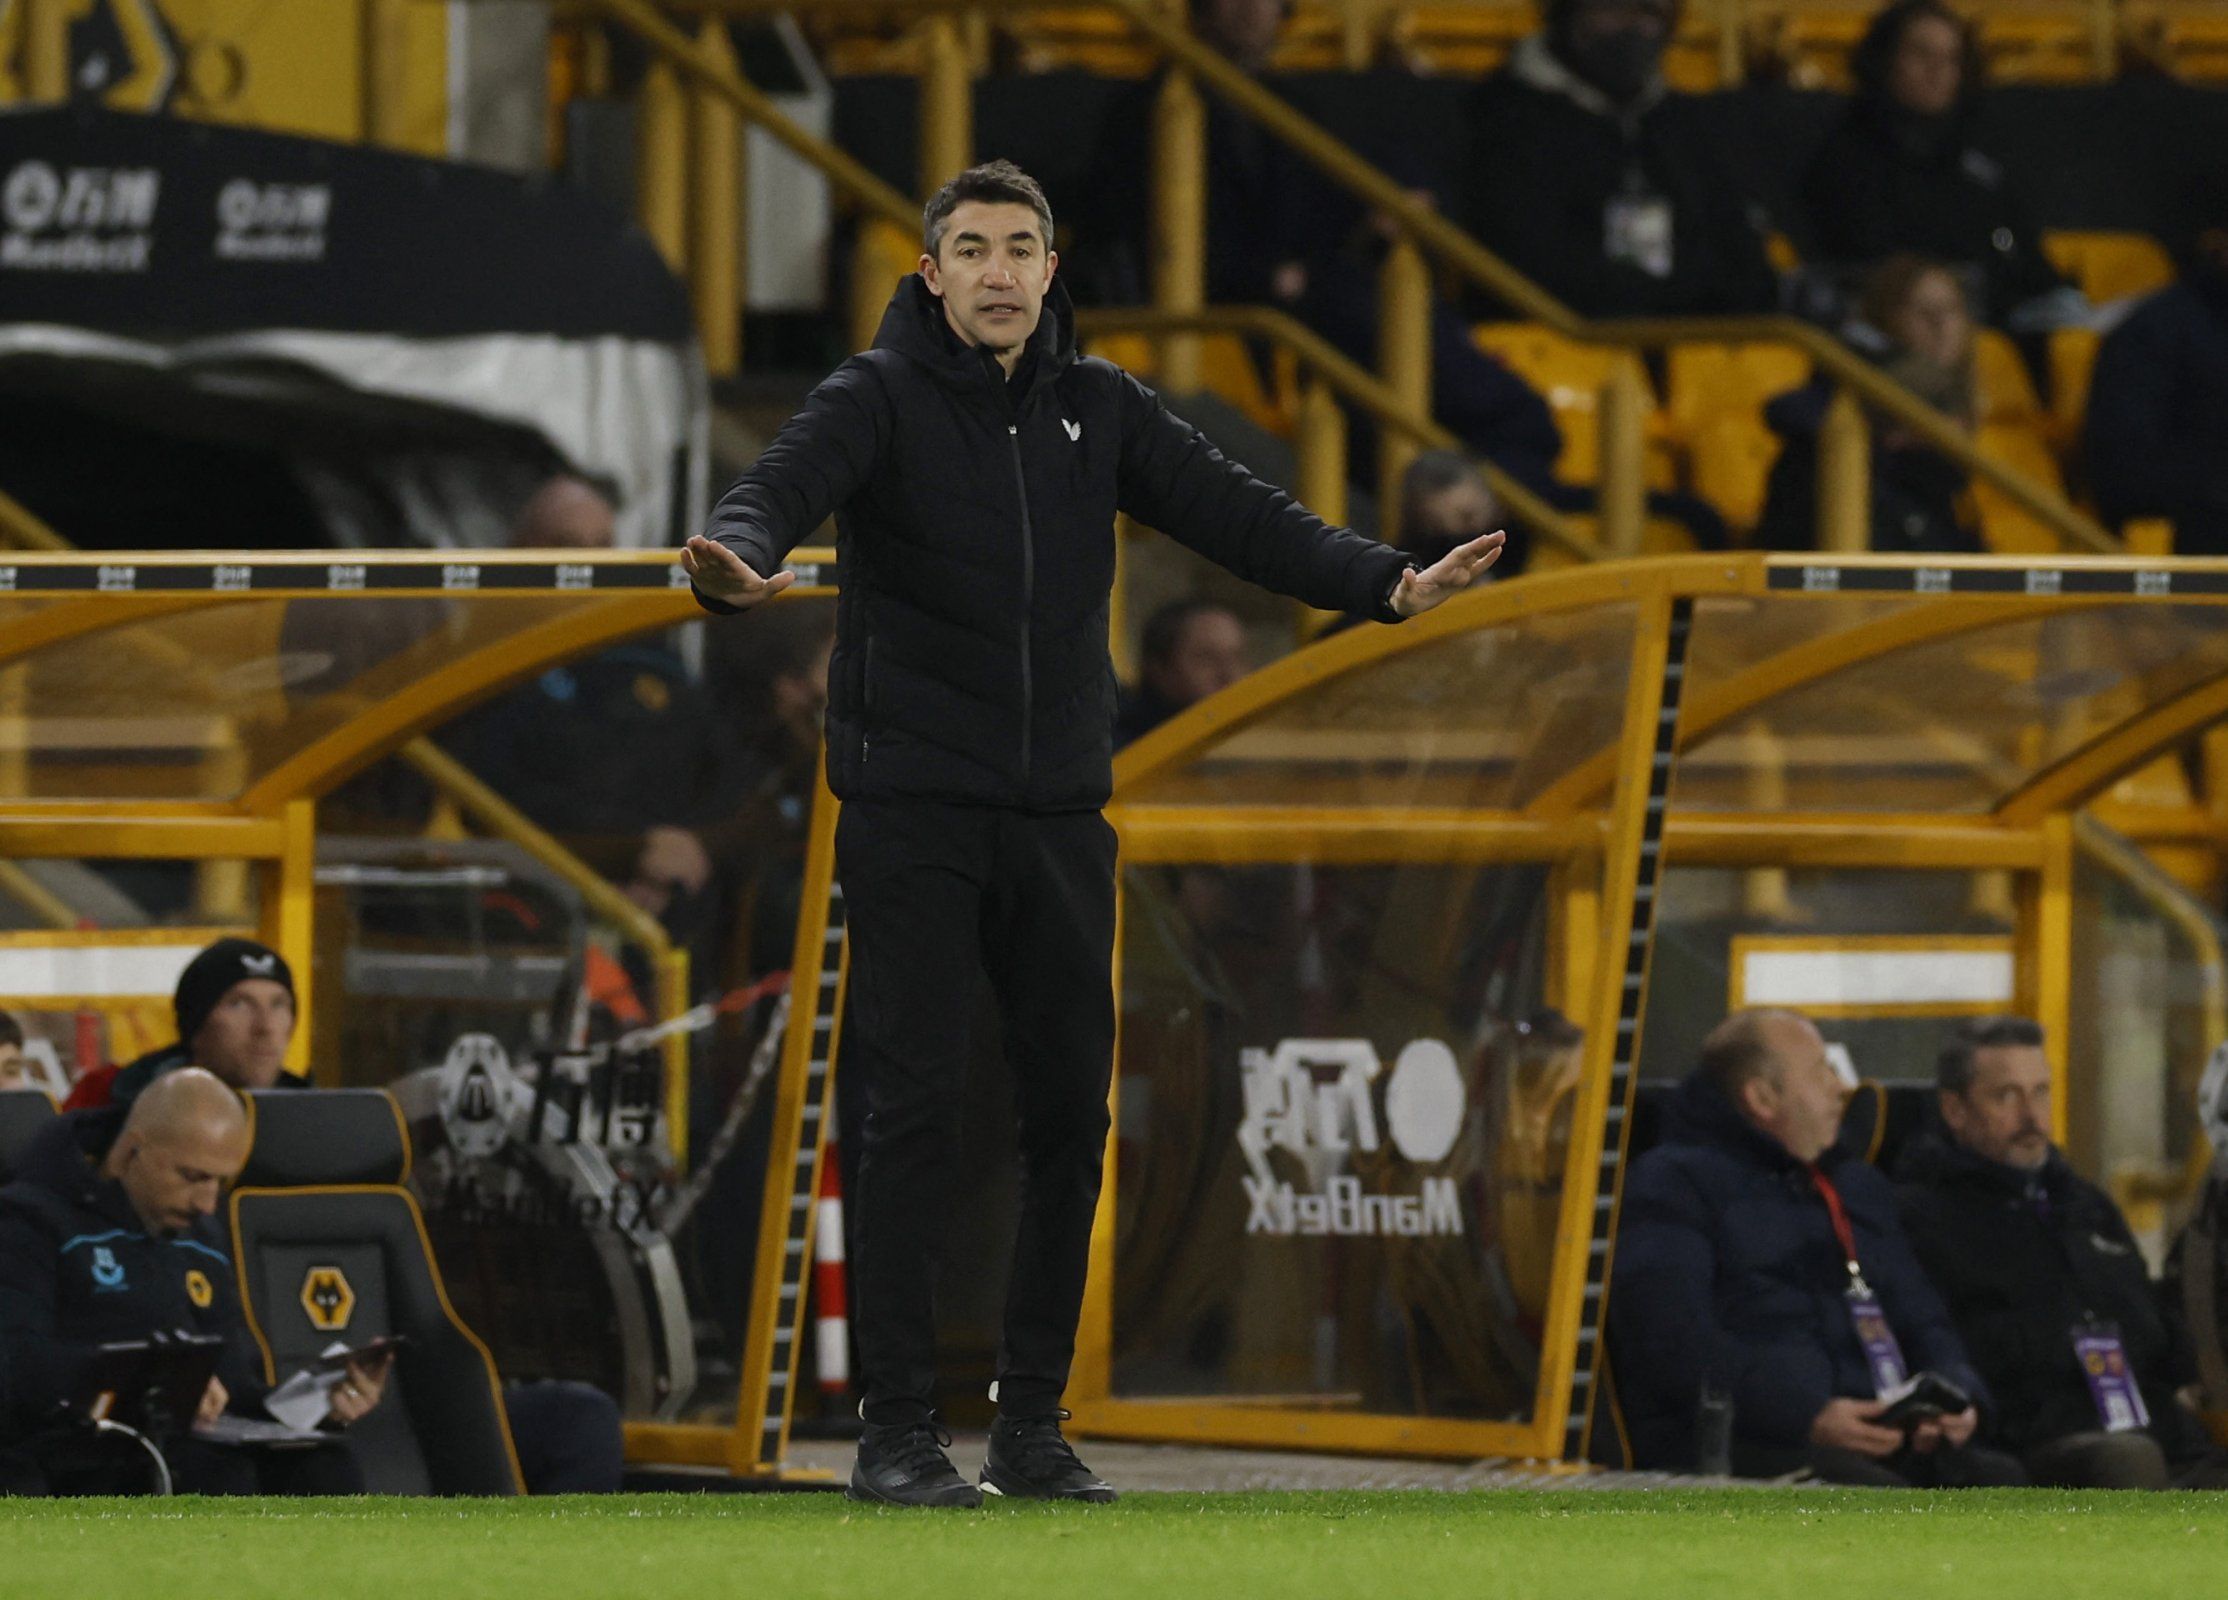 Bruno Lage, Fosun, Jeff Shi, Molineux, The Old Gold, Wolves, Wolves fans, Wolves info, Wolves latest, Wolves news, Wolves updates, WWFC, WWFC news, WWFC update, Premier League, Premier League news, Wolverhampton Wanderers, Tim Spiers, Wolves injury news, Wolves injury update, Wolves v Arsenal, 
